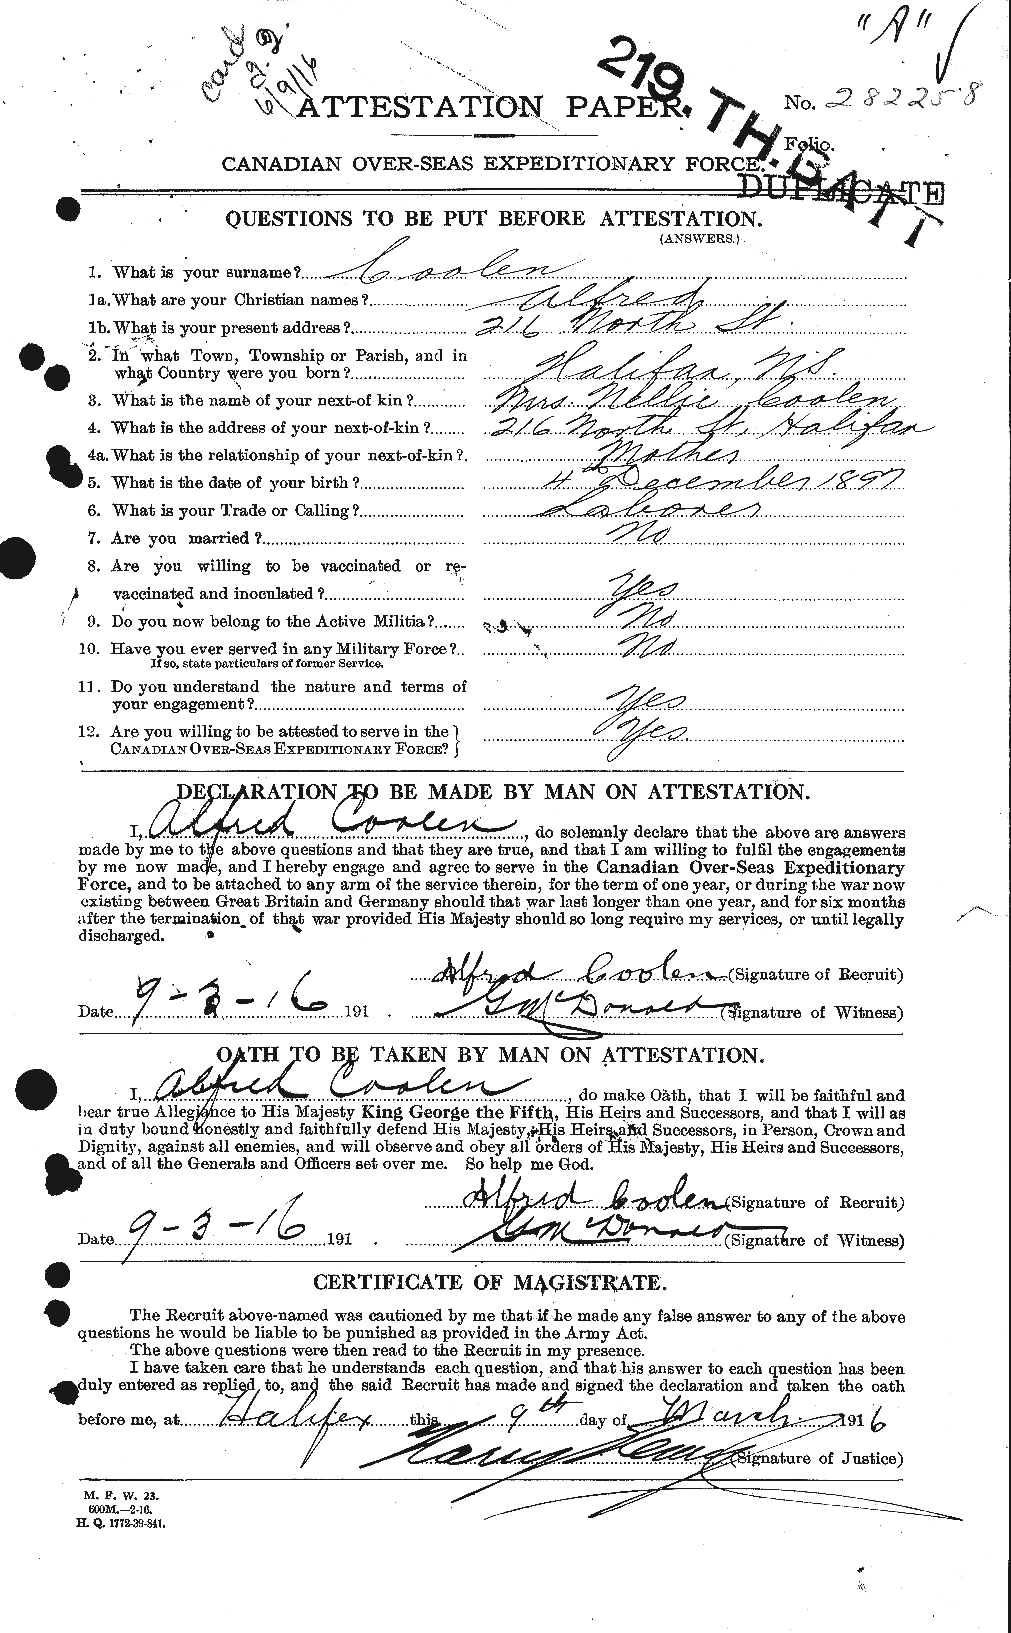 Personnel Records of the First World War - CEF 056338a